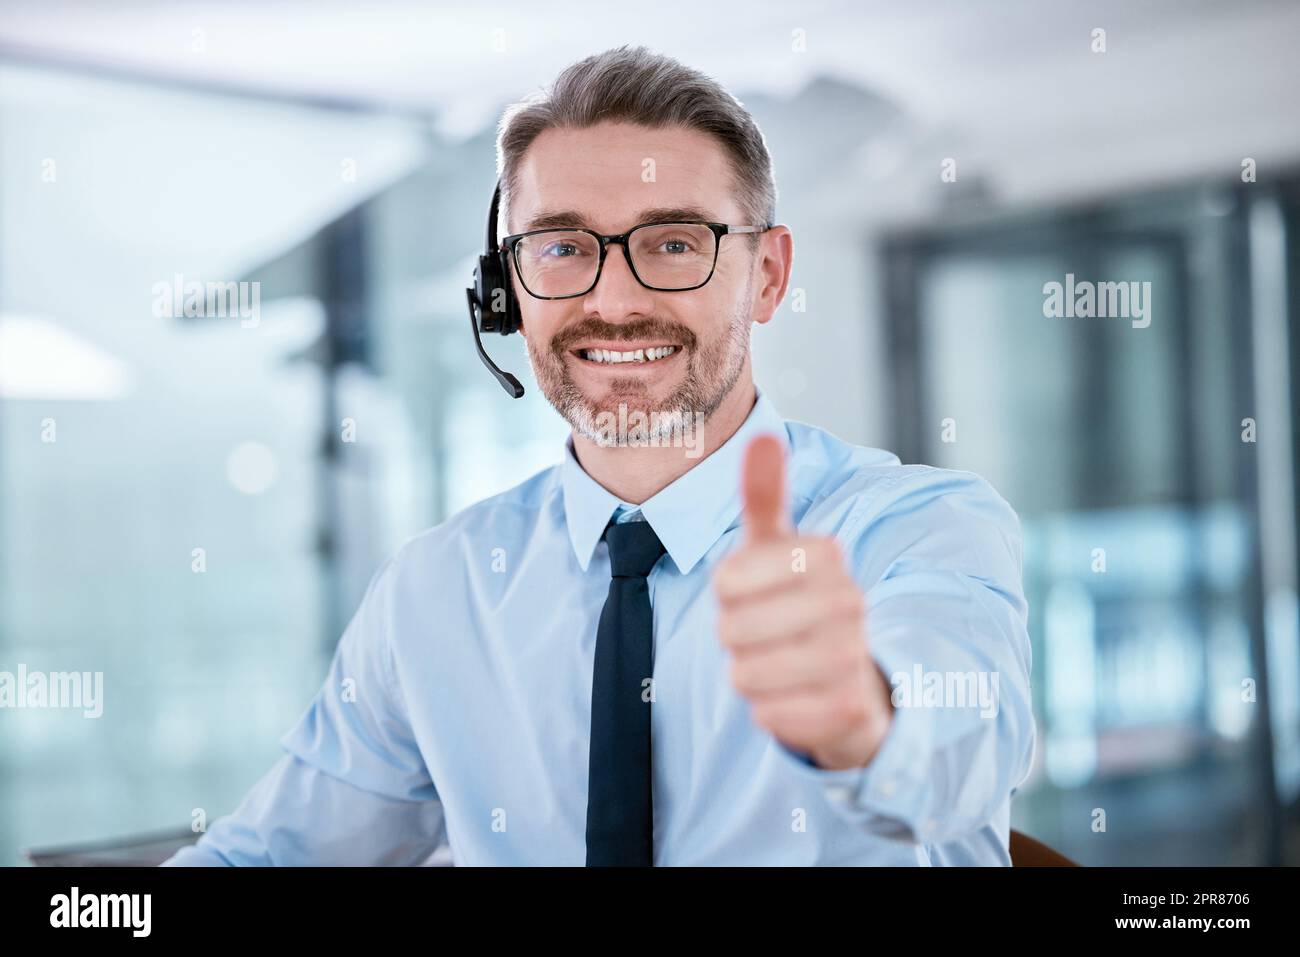 Im so thrilled to have reached my target. Portrait of a mature call centre agent showing thumbs up in an office. Stock Photo